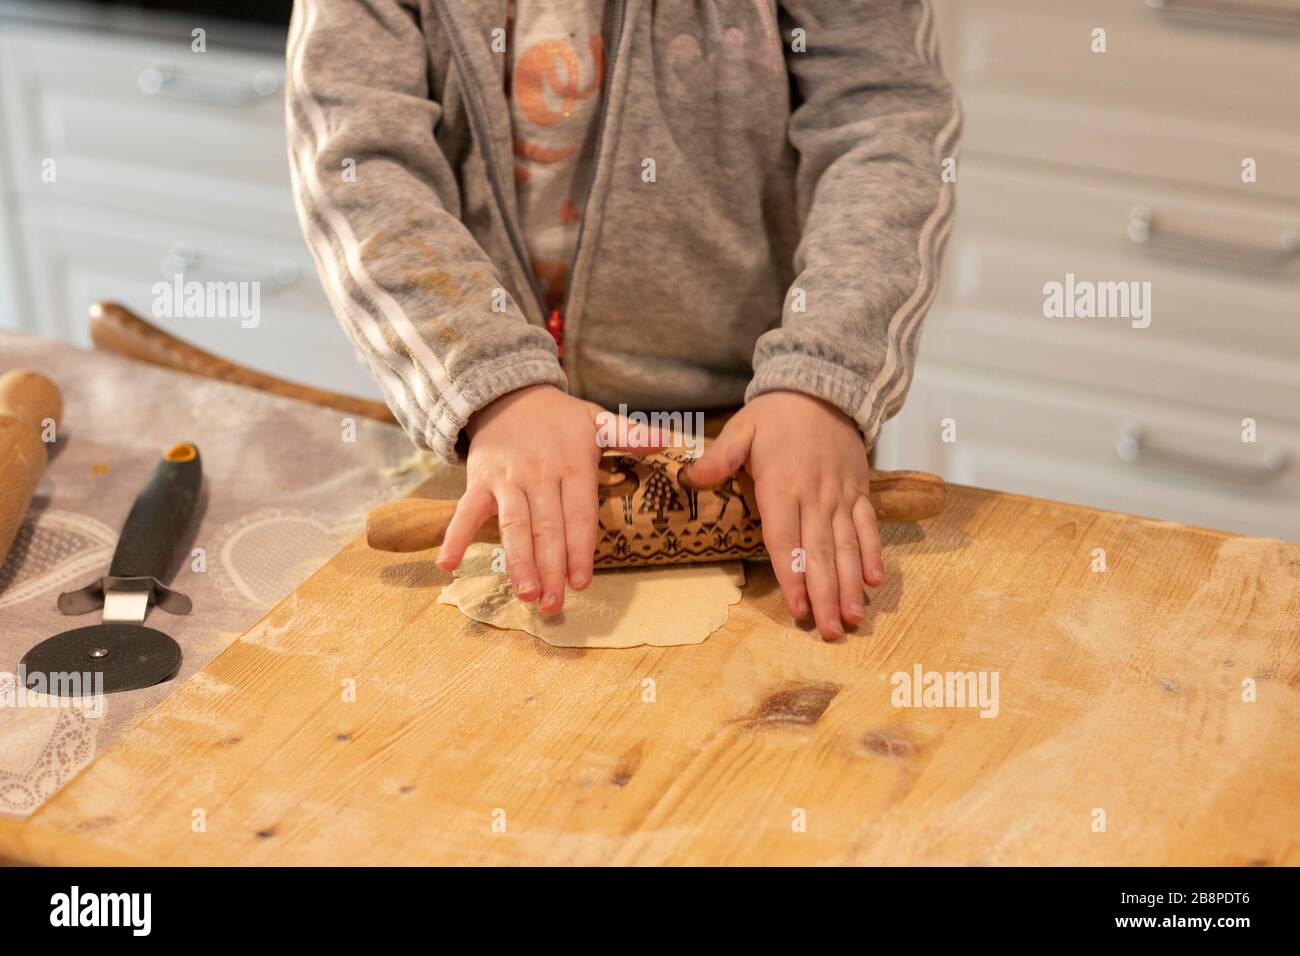 Child girl hands, in white kitchen, flattening pizza dough with a small rolling pin on a wooden board. Lockdown activity idea. Stock Photo